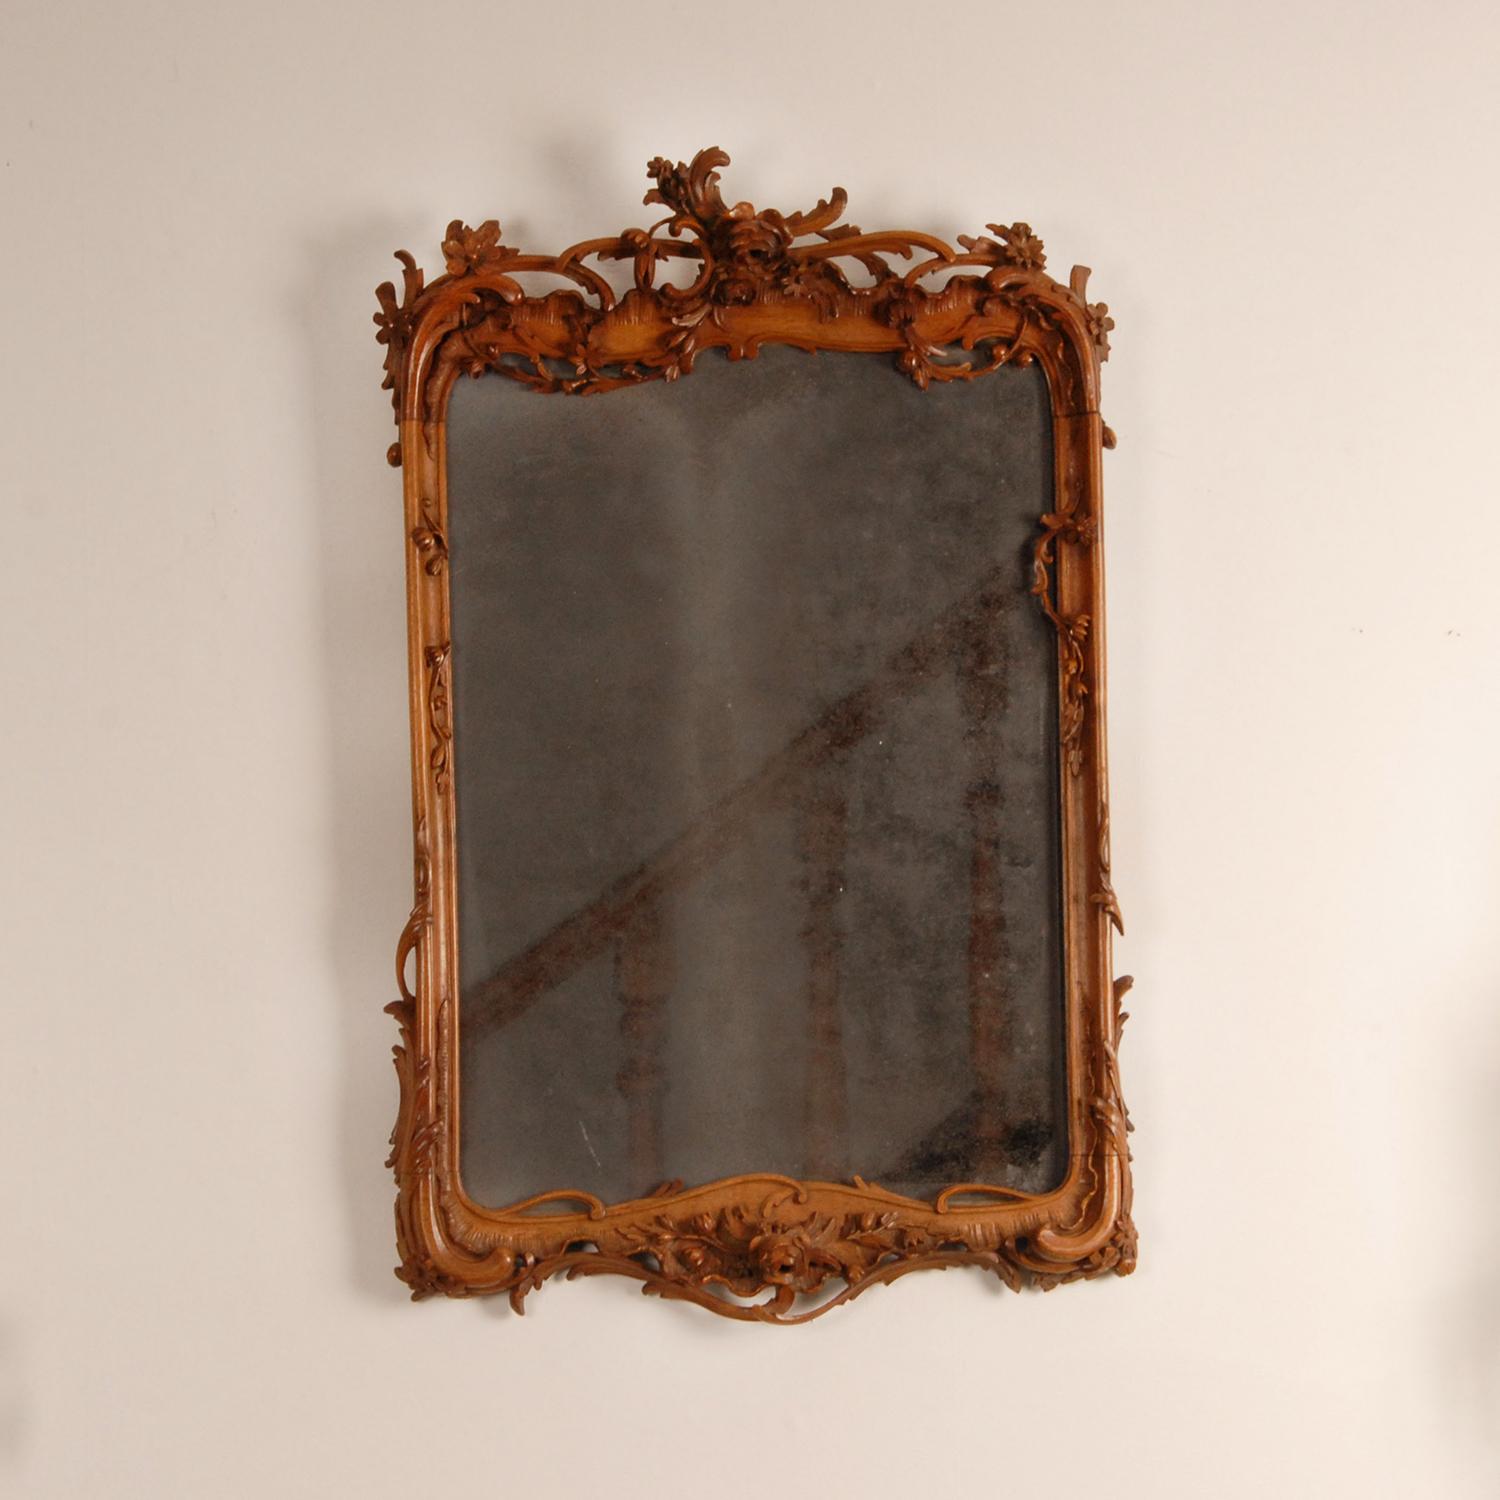 18th century Dutch Mirror Basswood Rococo

Material: Basswood, glass, Mirror
Design: Louis XV
Style: Rococo, Antique, Louis XV, 18th century, Dutch
Origin: Netherlands, 18th century
Color: Tan
Condition: Good with minor missings and repairs.
The